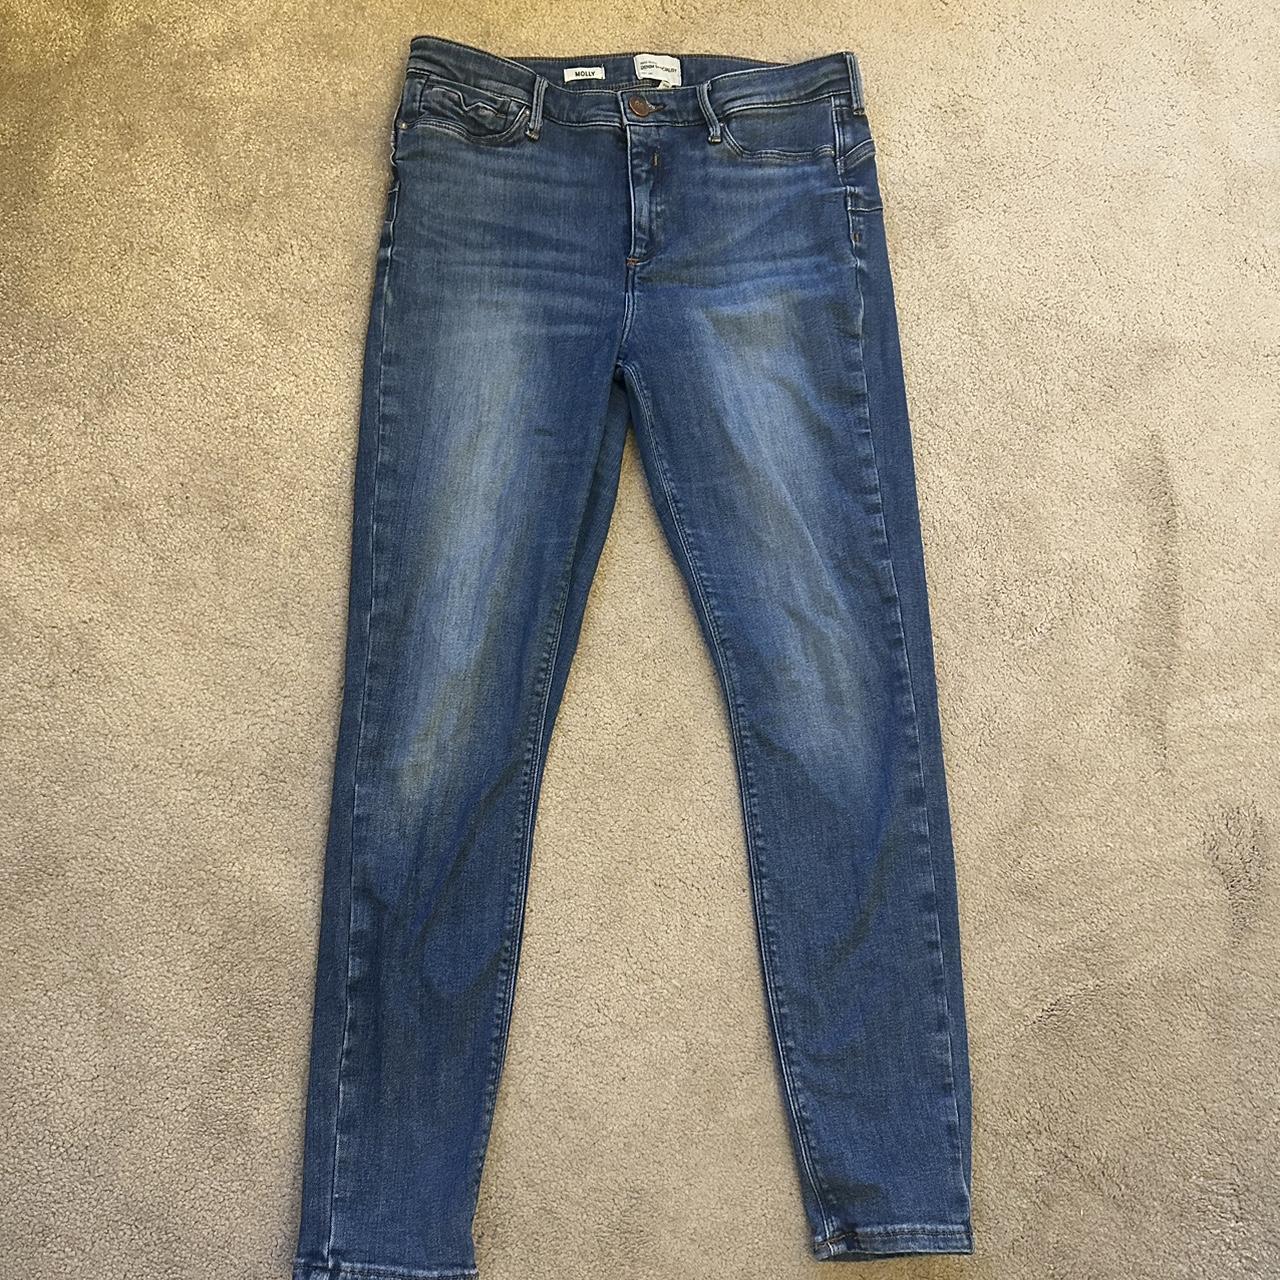 River Island Molly Skinny Jeans in Blue